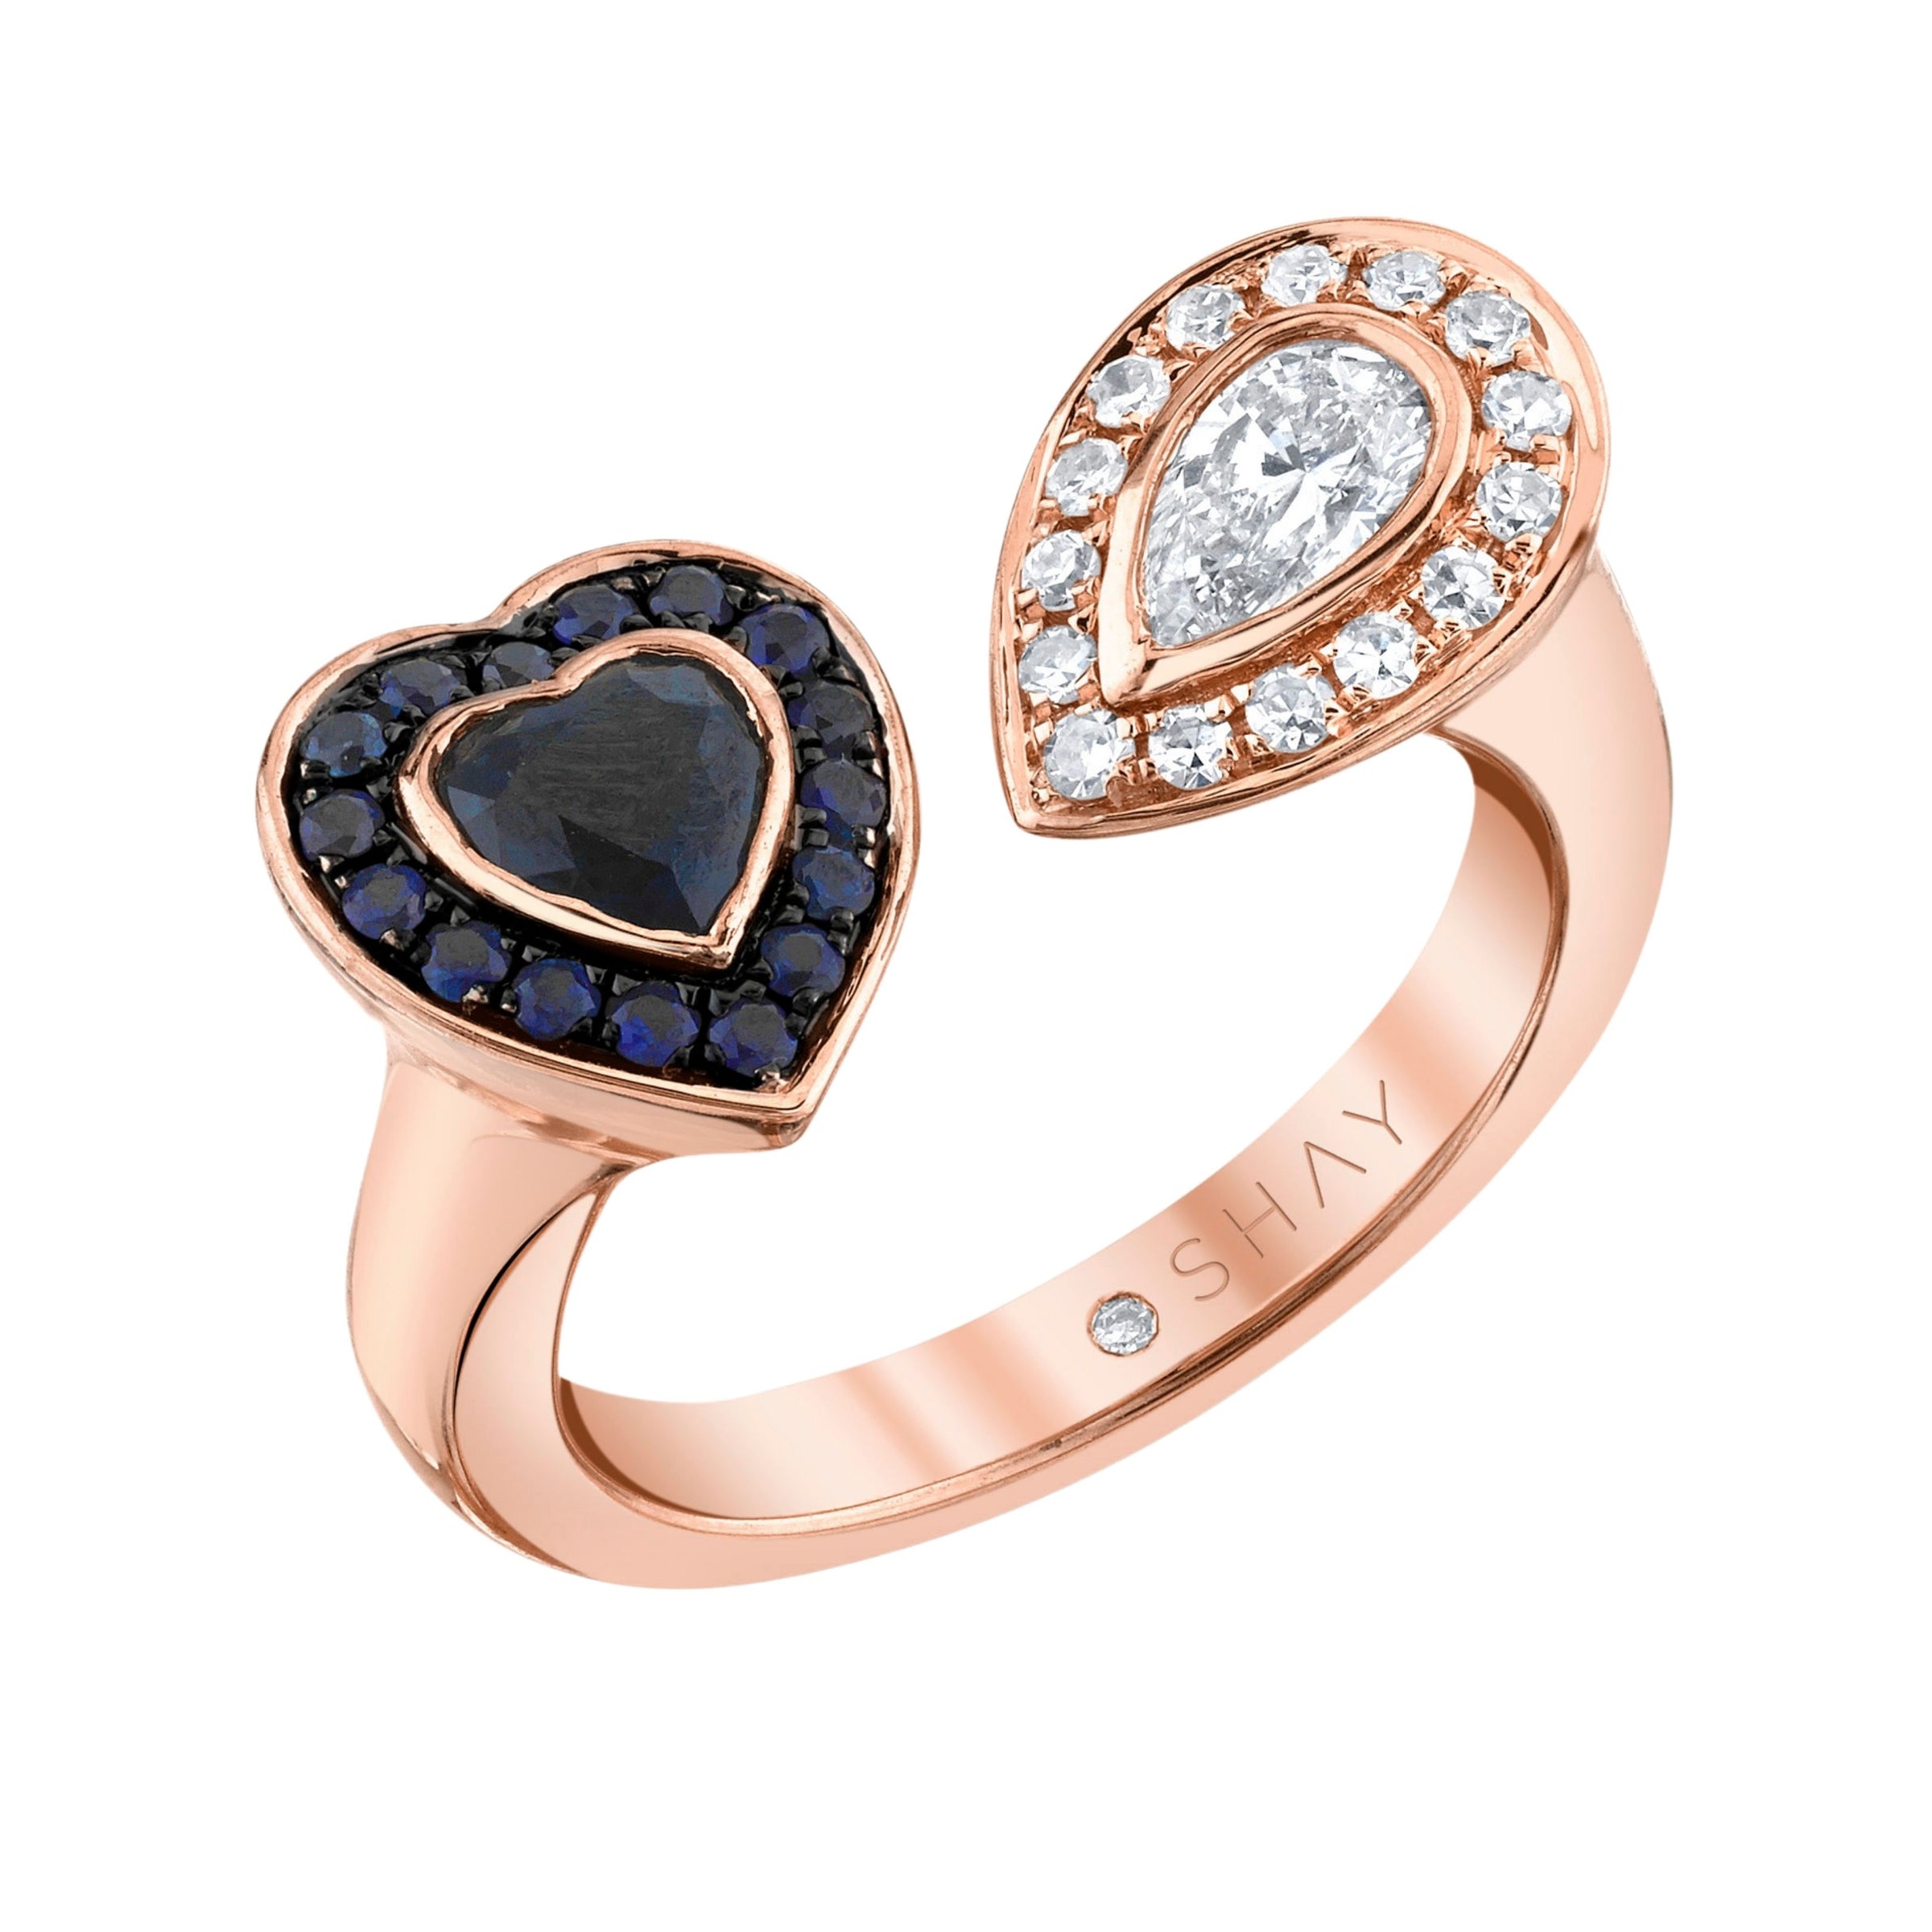 Chopard High Jewelry 18K White Gold One-of-a-Kind Blue Sapphire Solitaire  Ring, EU 53 / US 6.25